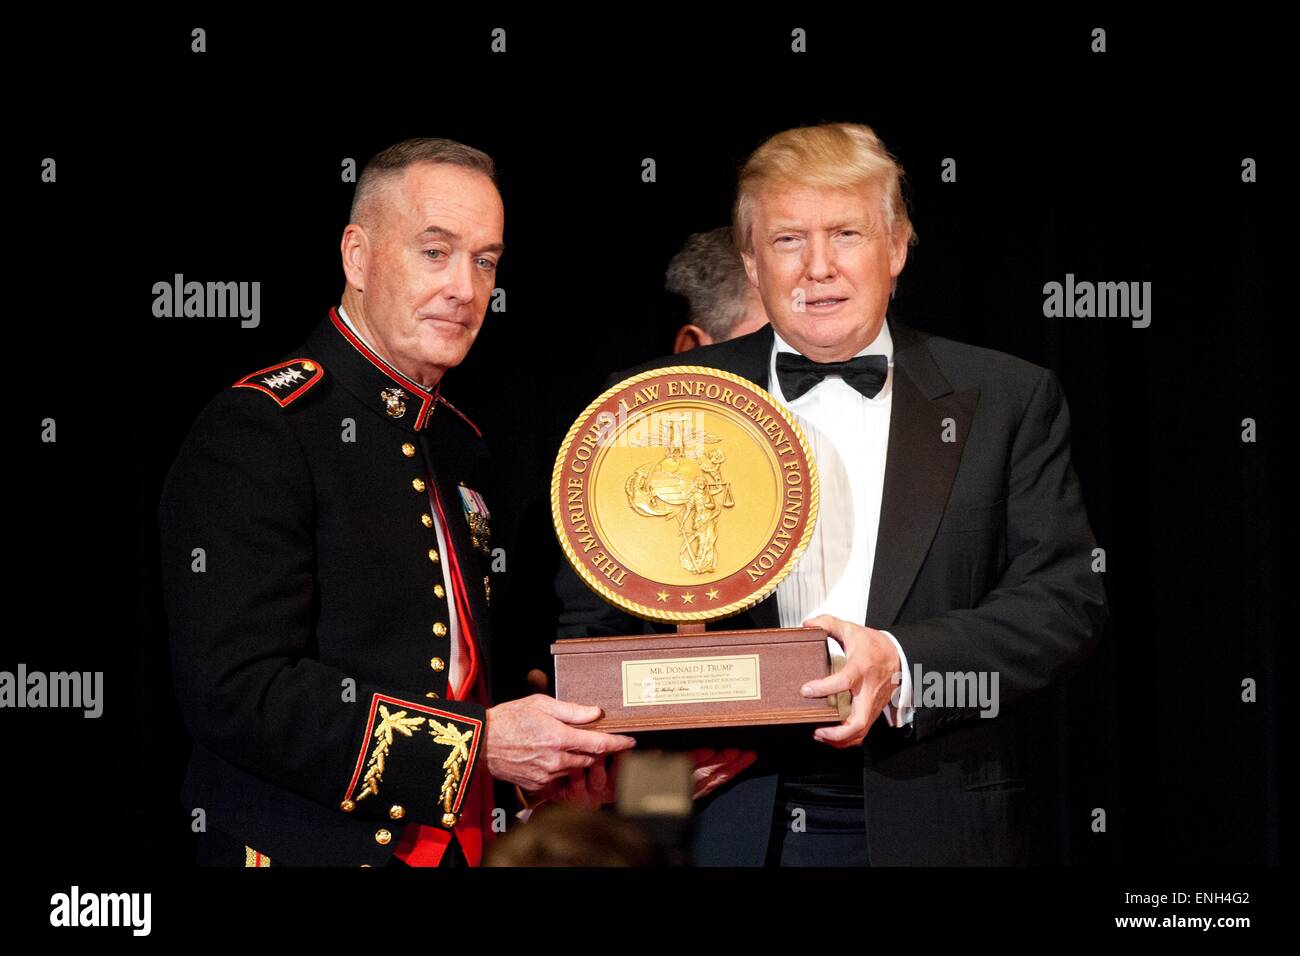 U.S. Marine Corps Gen. Joseph F. Dunford, Jr. and with Donald Trump presents the Marine Corps-Law Enforcement Foundation awards during the 20th Annual Semper Fidelis Gala dinner April 22, 2015 in New York City. President Obama announced May 5, 2015 that Dunford will become the new Chairman of the Joint Chiefs. Stock Photo